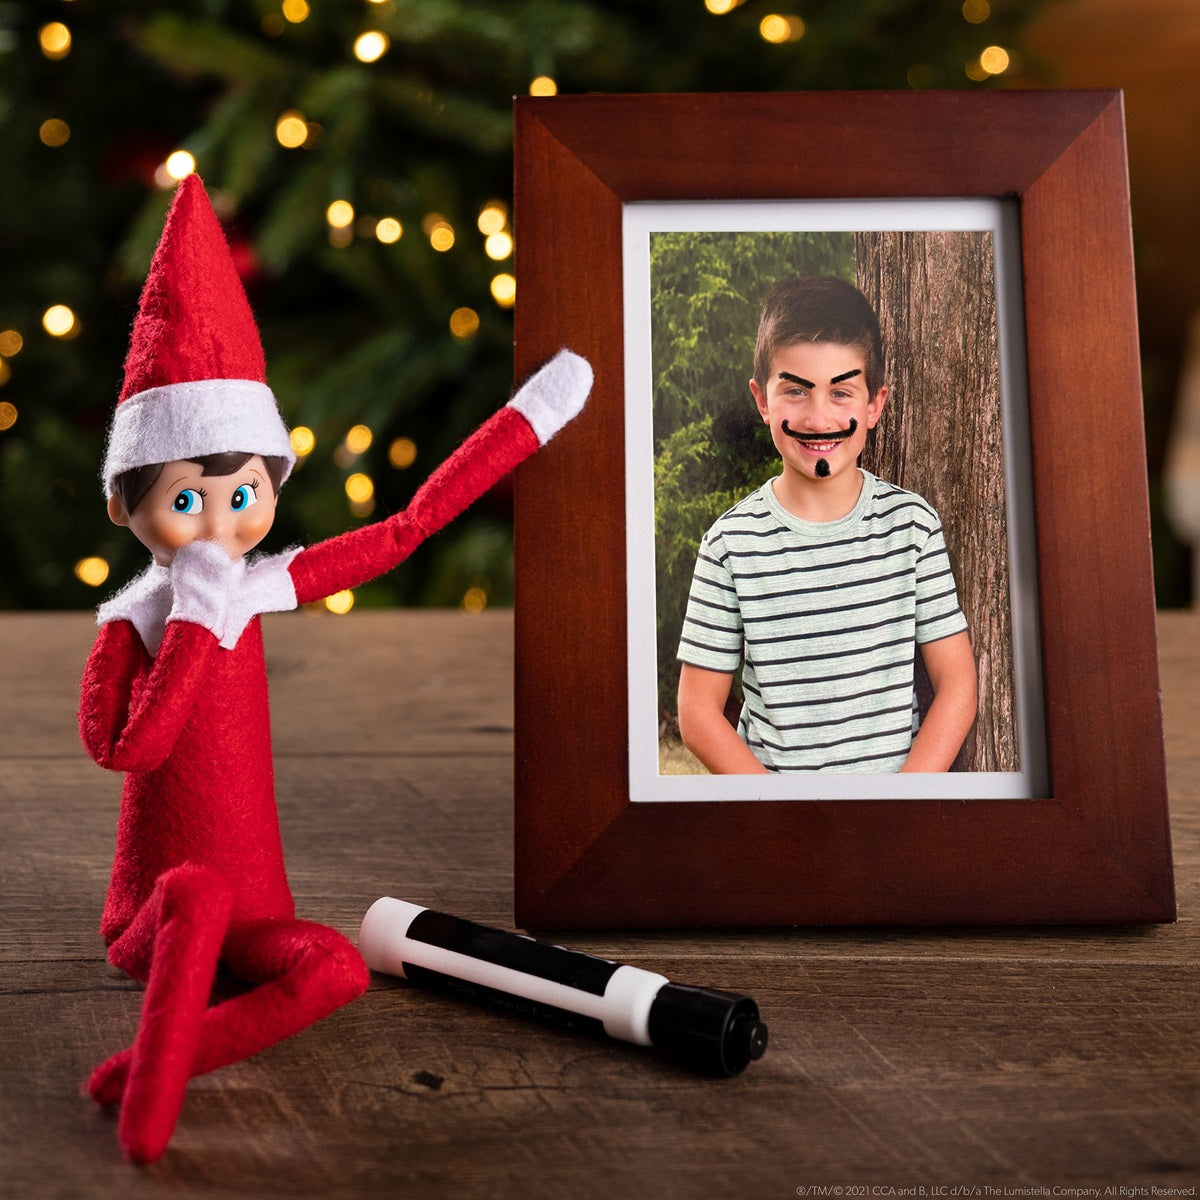 The Elf On The Shelf (STORY AND ELF) - BOY – Lunitas y Duendes